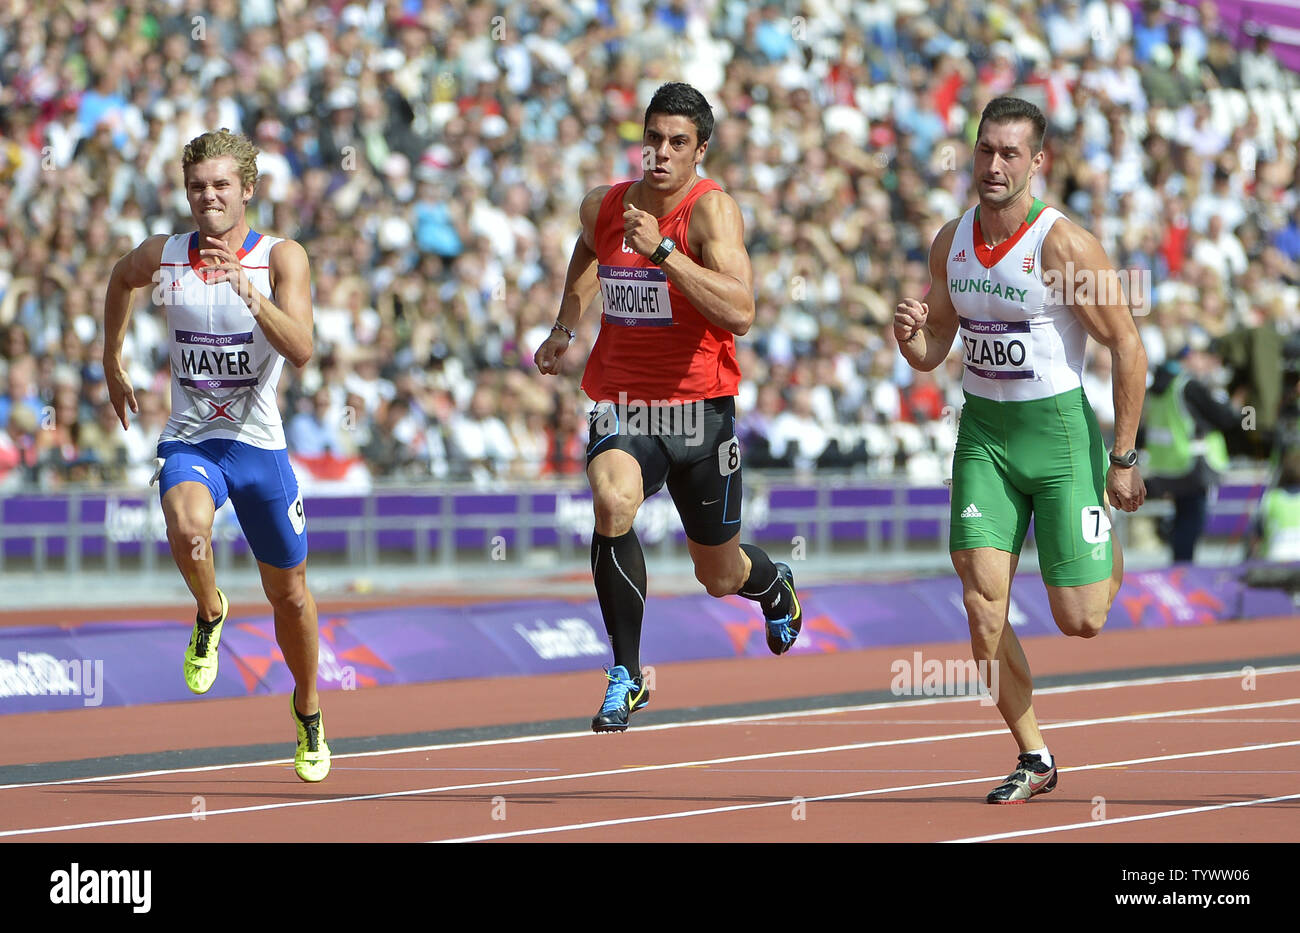 Kevin Mayer of France, Gonzalo Barroilhet of Chile and Attila Szabo of Hungary compete in the 100M of the Men's Decathlon at the London 2012 Summer Olympics on August 8, 2012 in Stratford, London. Mayer finished in 111.32 seconds, Barroilhet in 11.18 seconds and Szabo in 11.15 seconds.     UPI/Brian Kersey Stock Photo